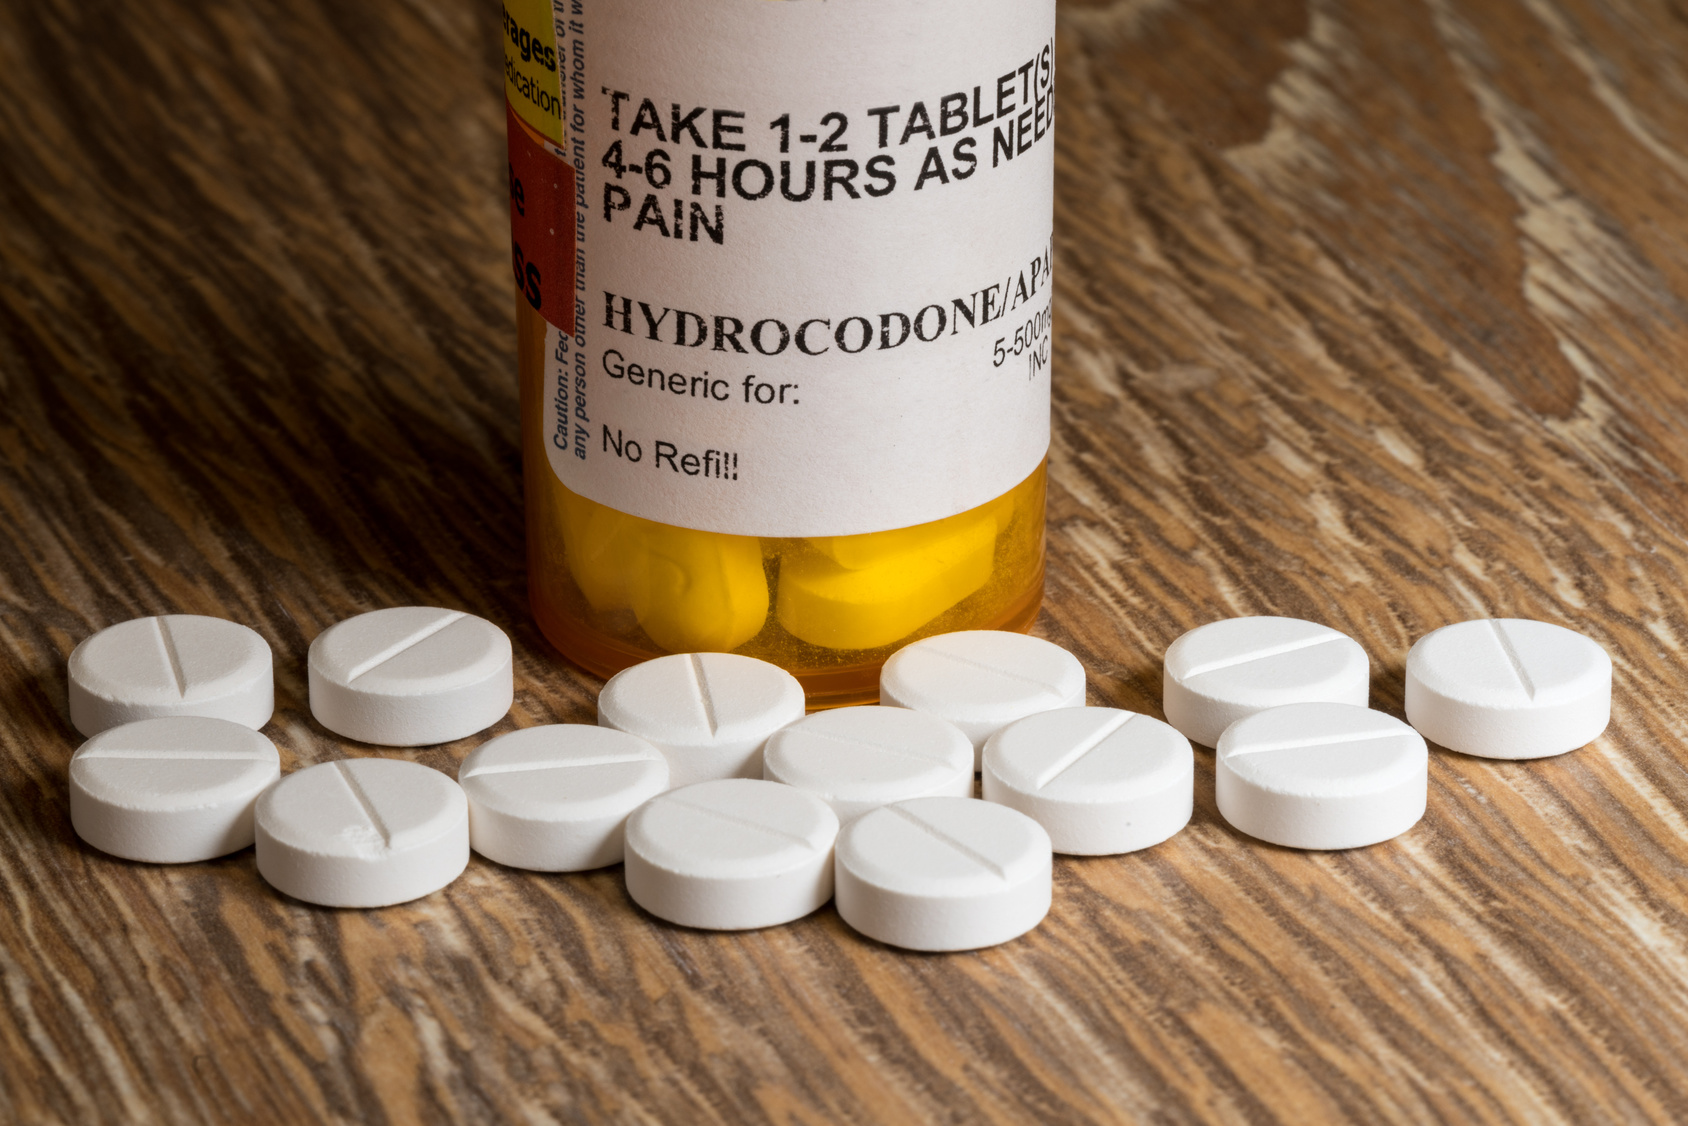 Feds Announce Largest-Ever Crackdown on Opioid-Related Health Care Fraud